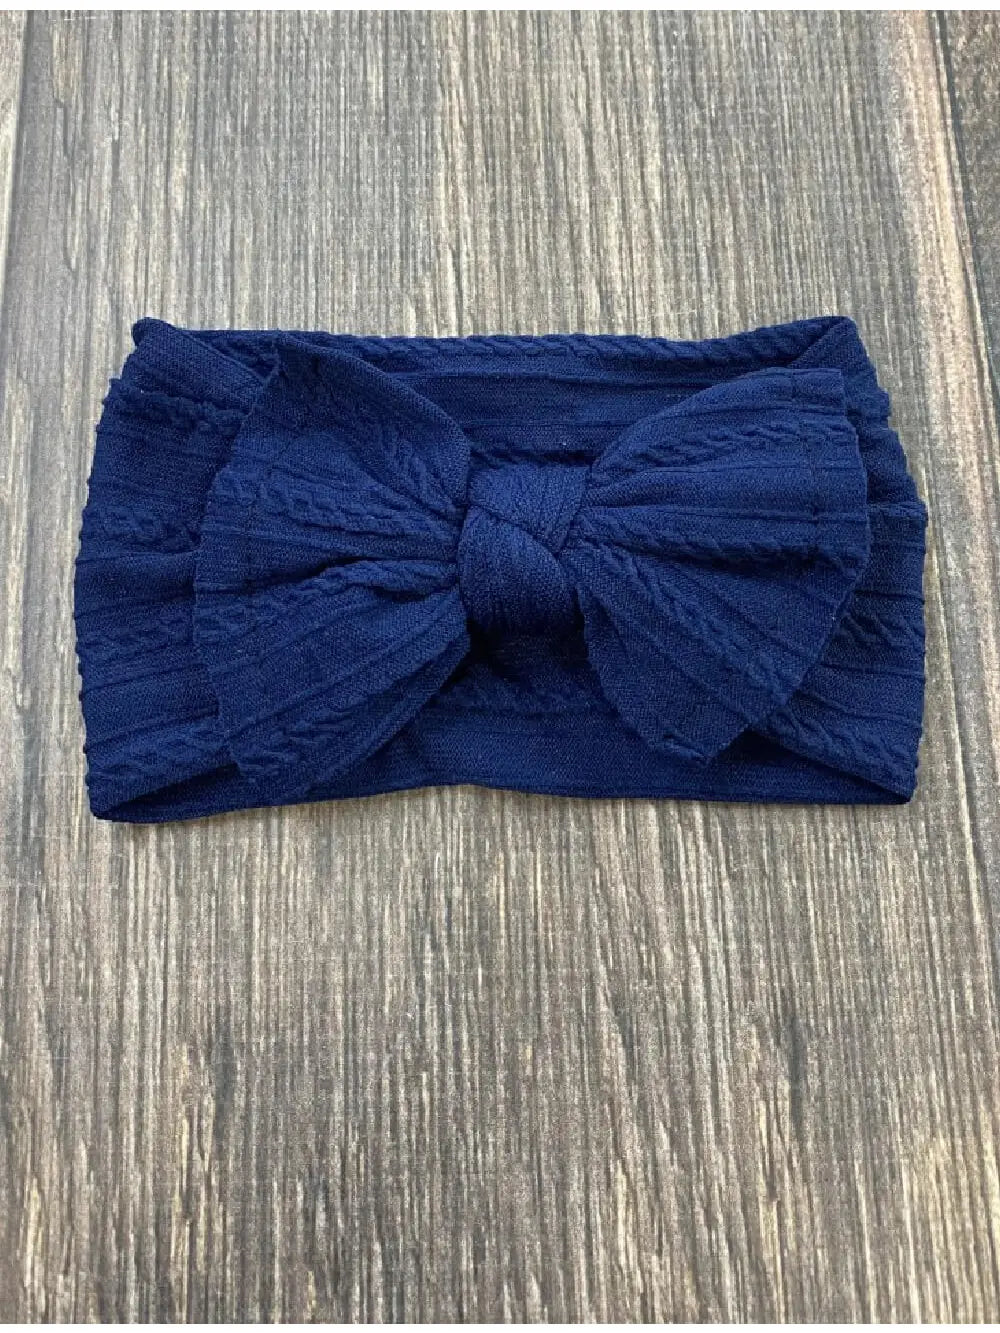 Cable Knit Bow Headband - Multiple Colors